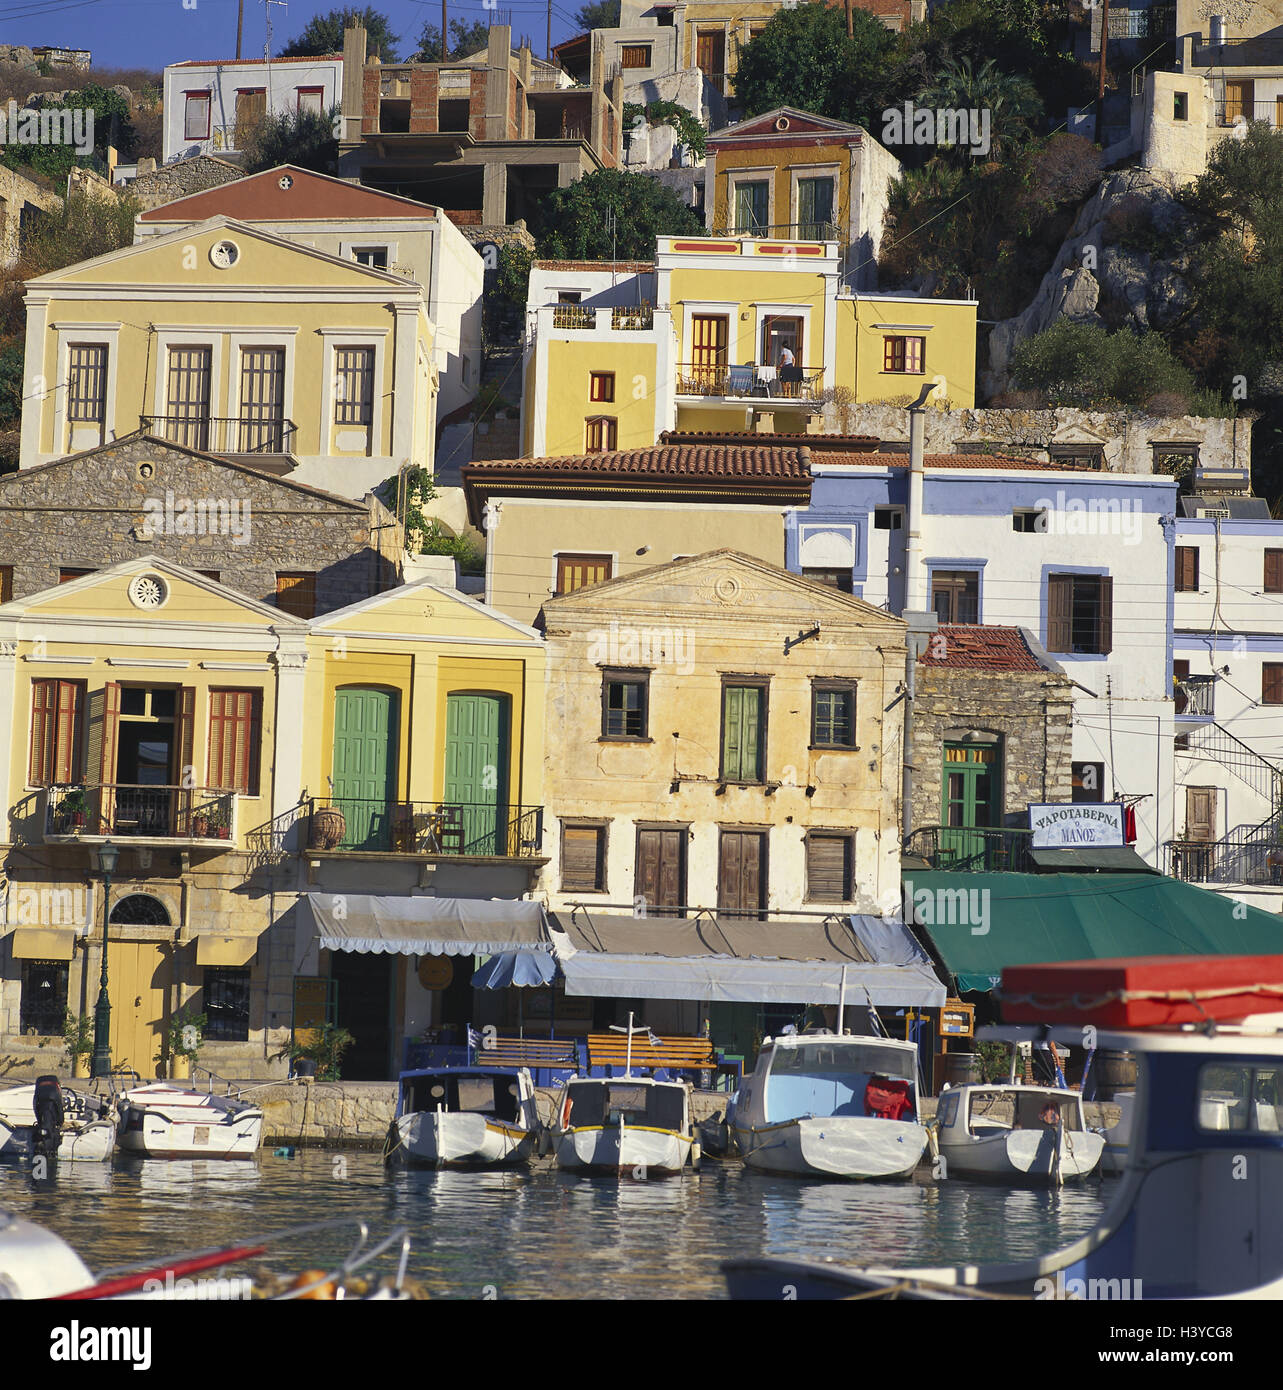 Greece, Simi, Simi town, harbour, boots, Dodekanes, townscape, island, island Simi, Symi, Gialos, the Aegean Sea, Aegean sea, town, the southern Sporades, island group, townscape, residential houses, '12 islands' Stock Photo